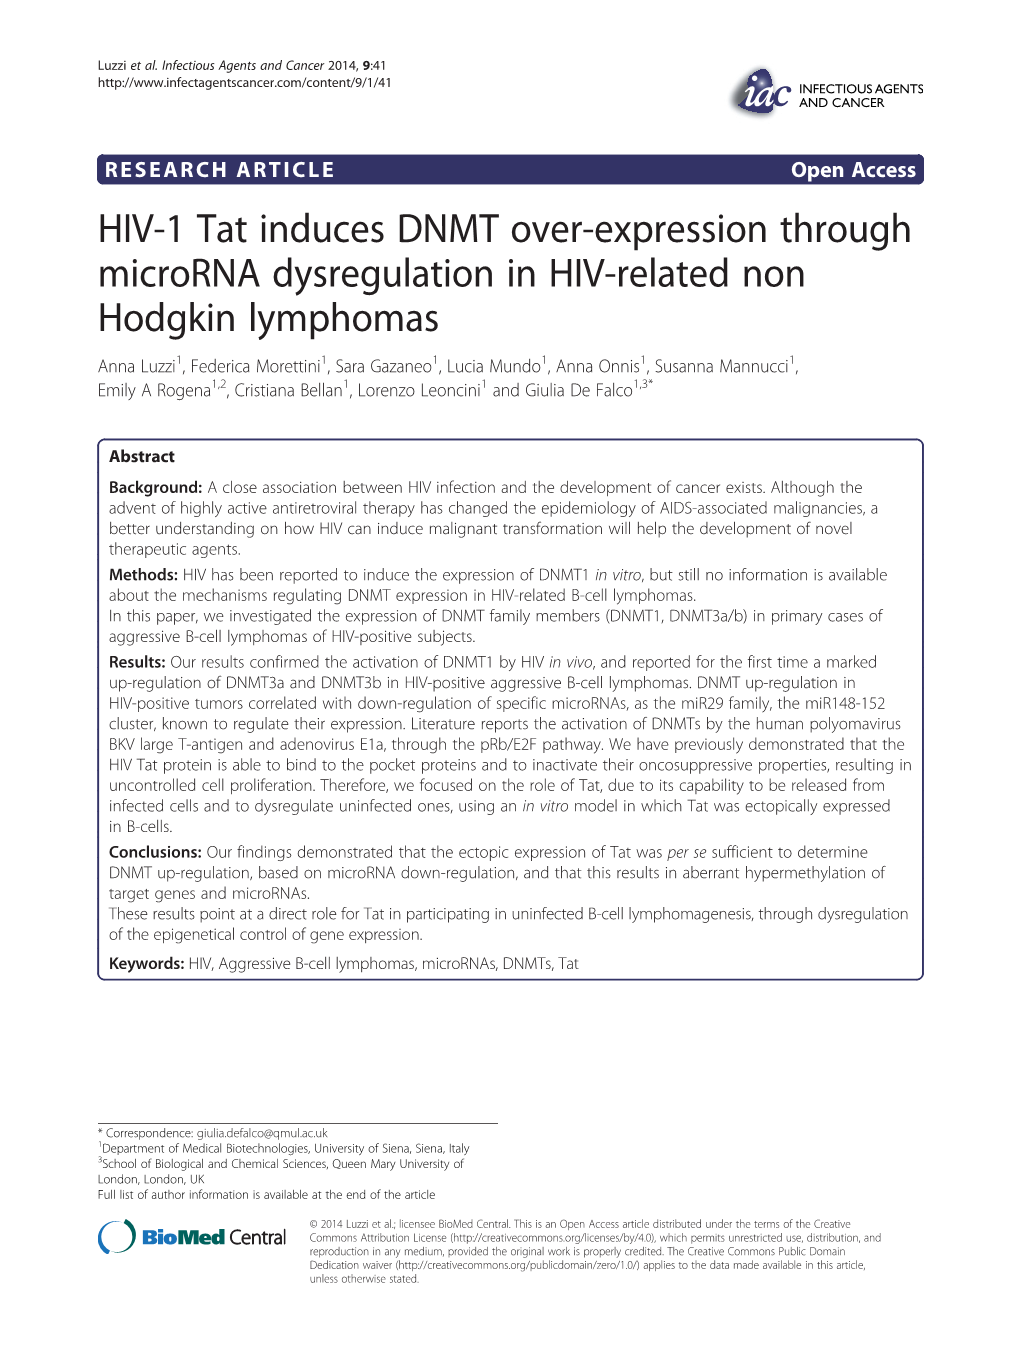 HIV-1 Tat Induces DNMT Over-Expression Through Microrna